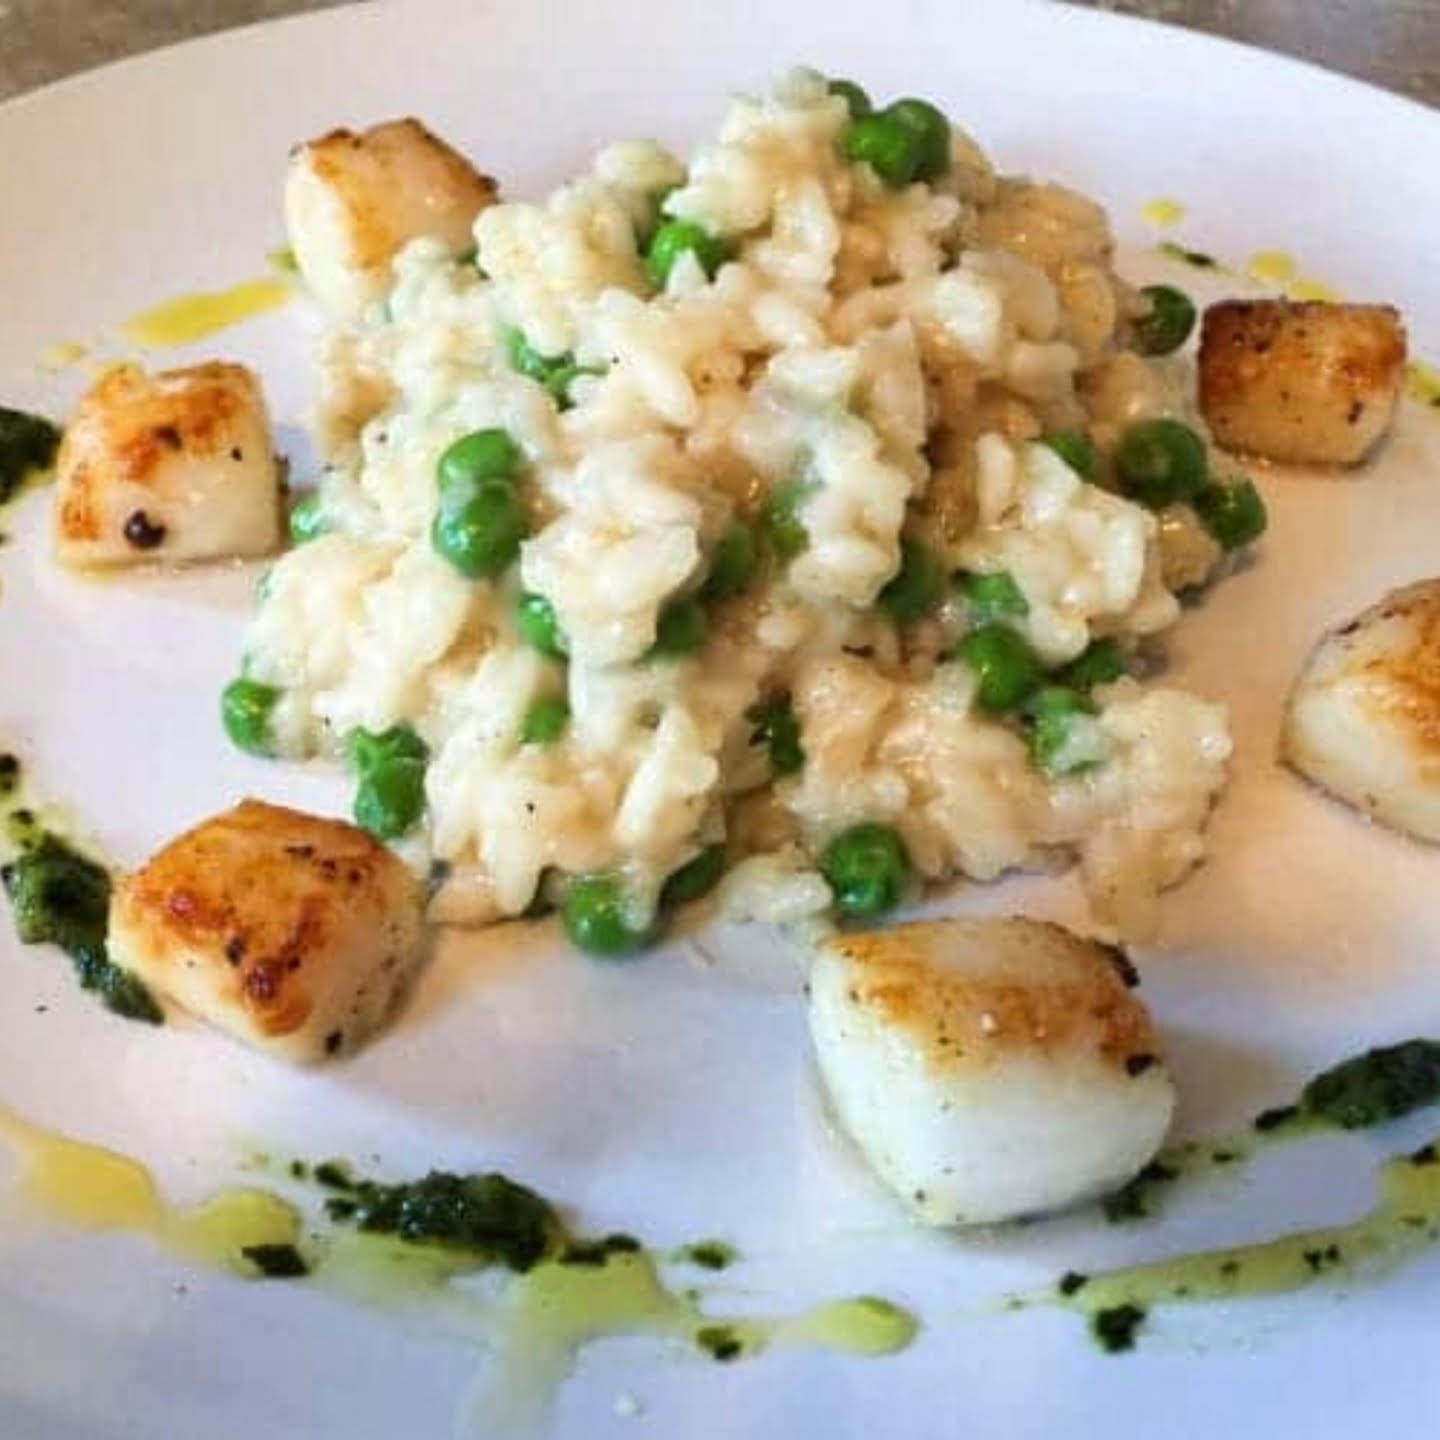 Champagne risotto with seared scallops and peas